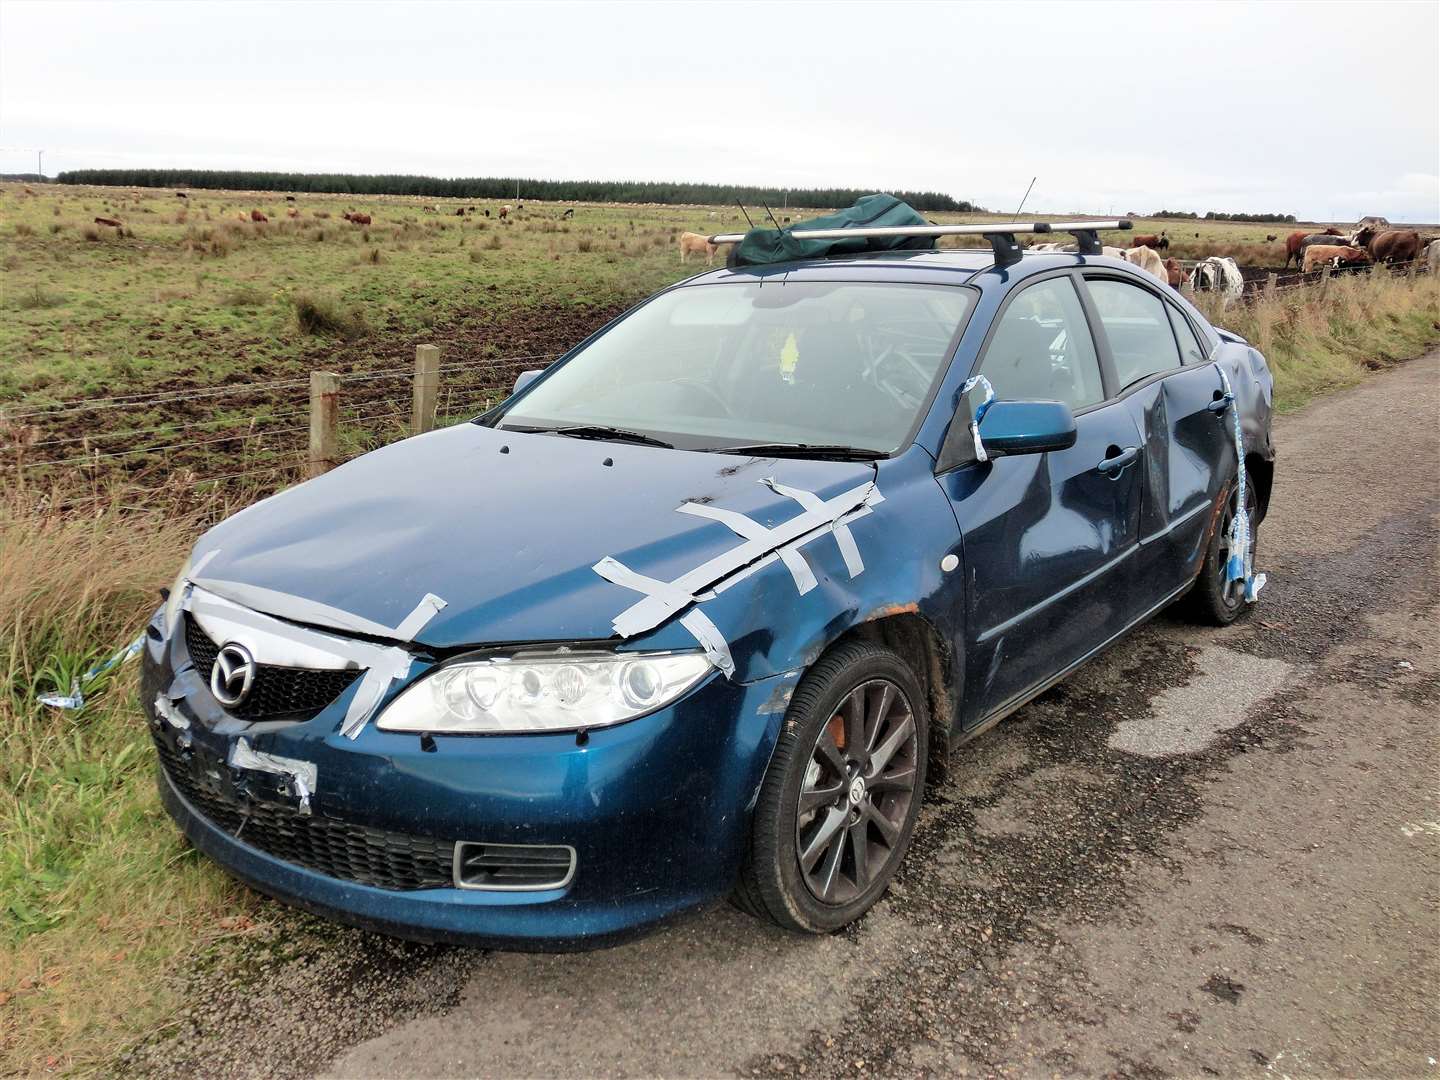 The blue Mazda left abandoned at the side of the road near Keiss shows signs of damage. Picture: DGS.